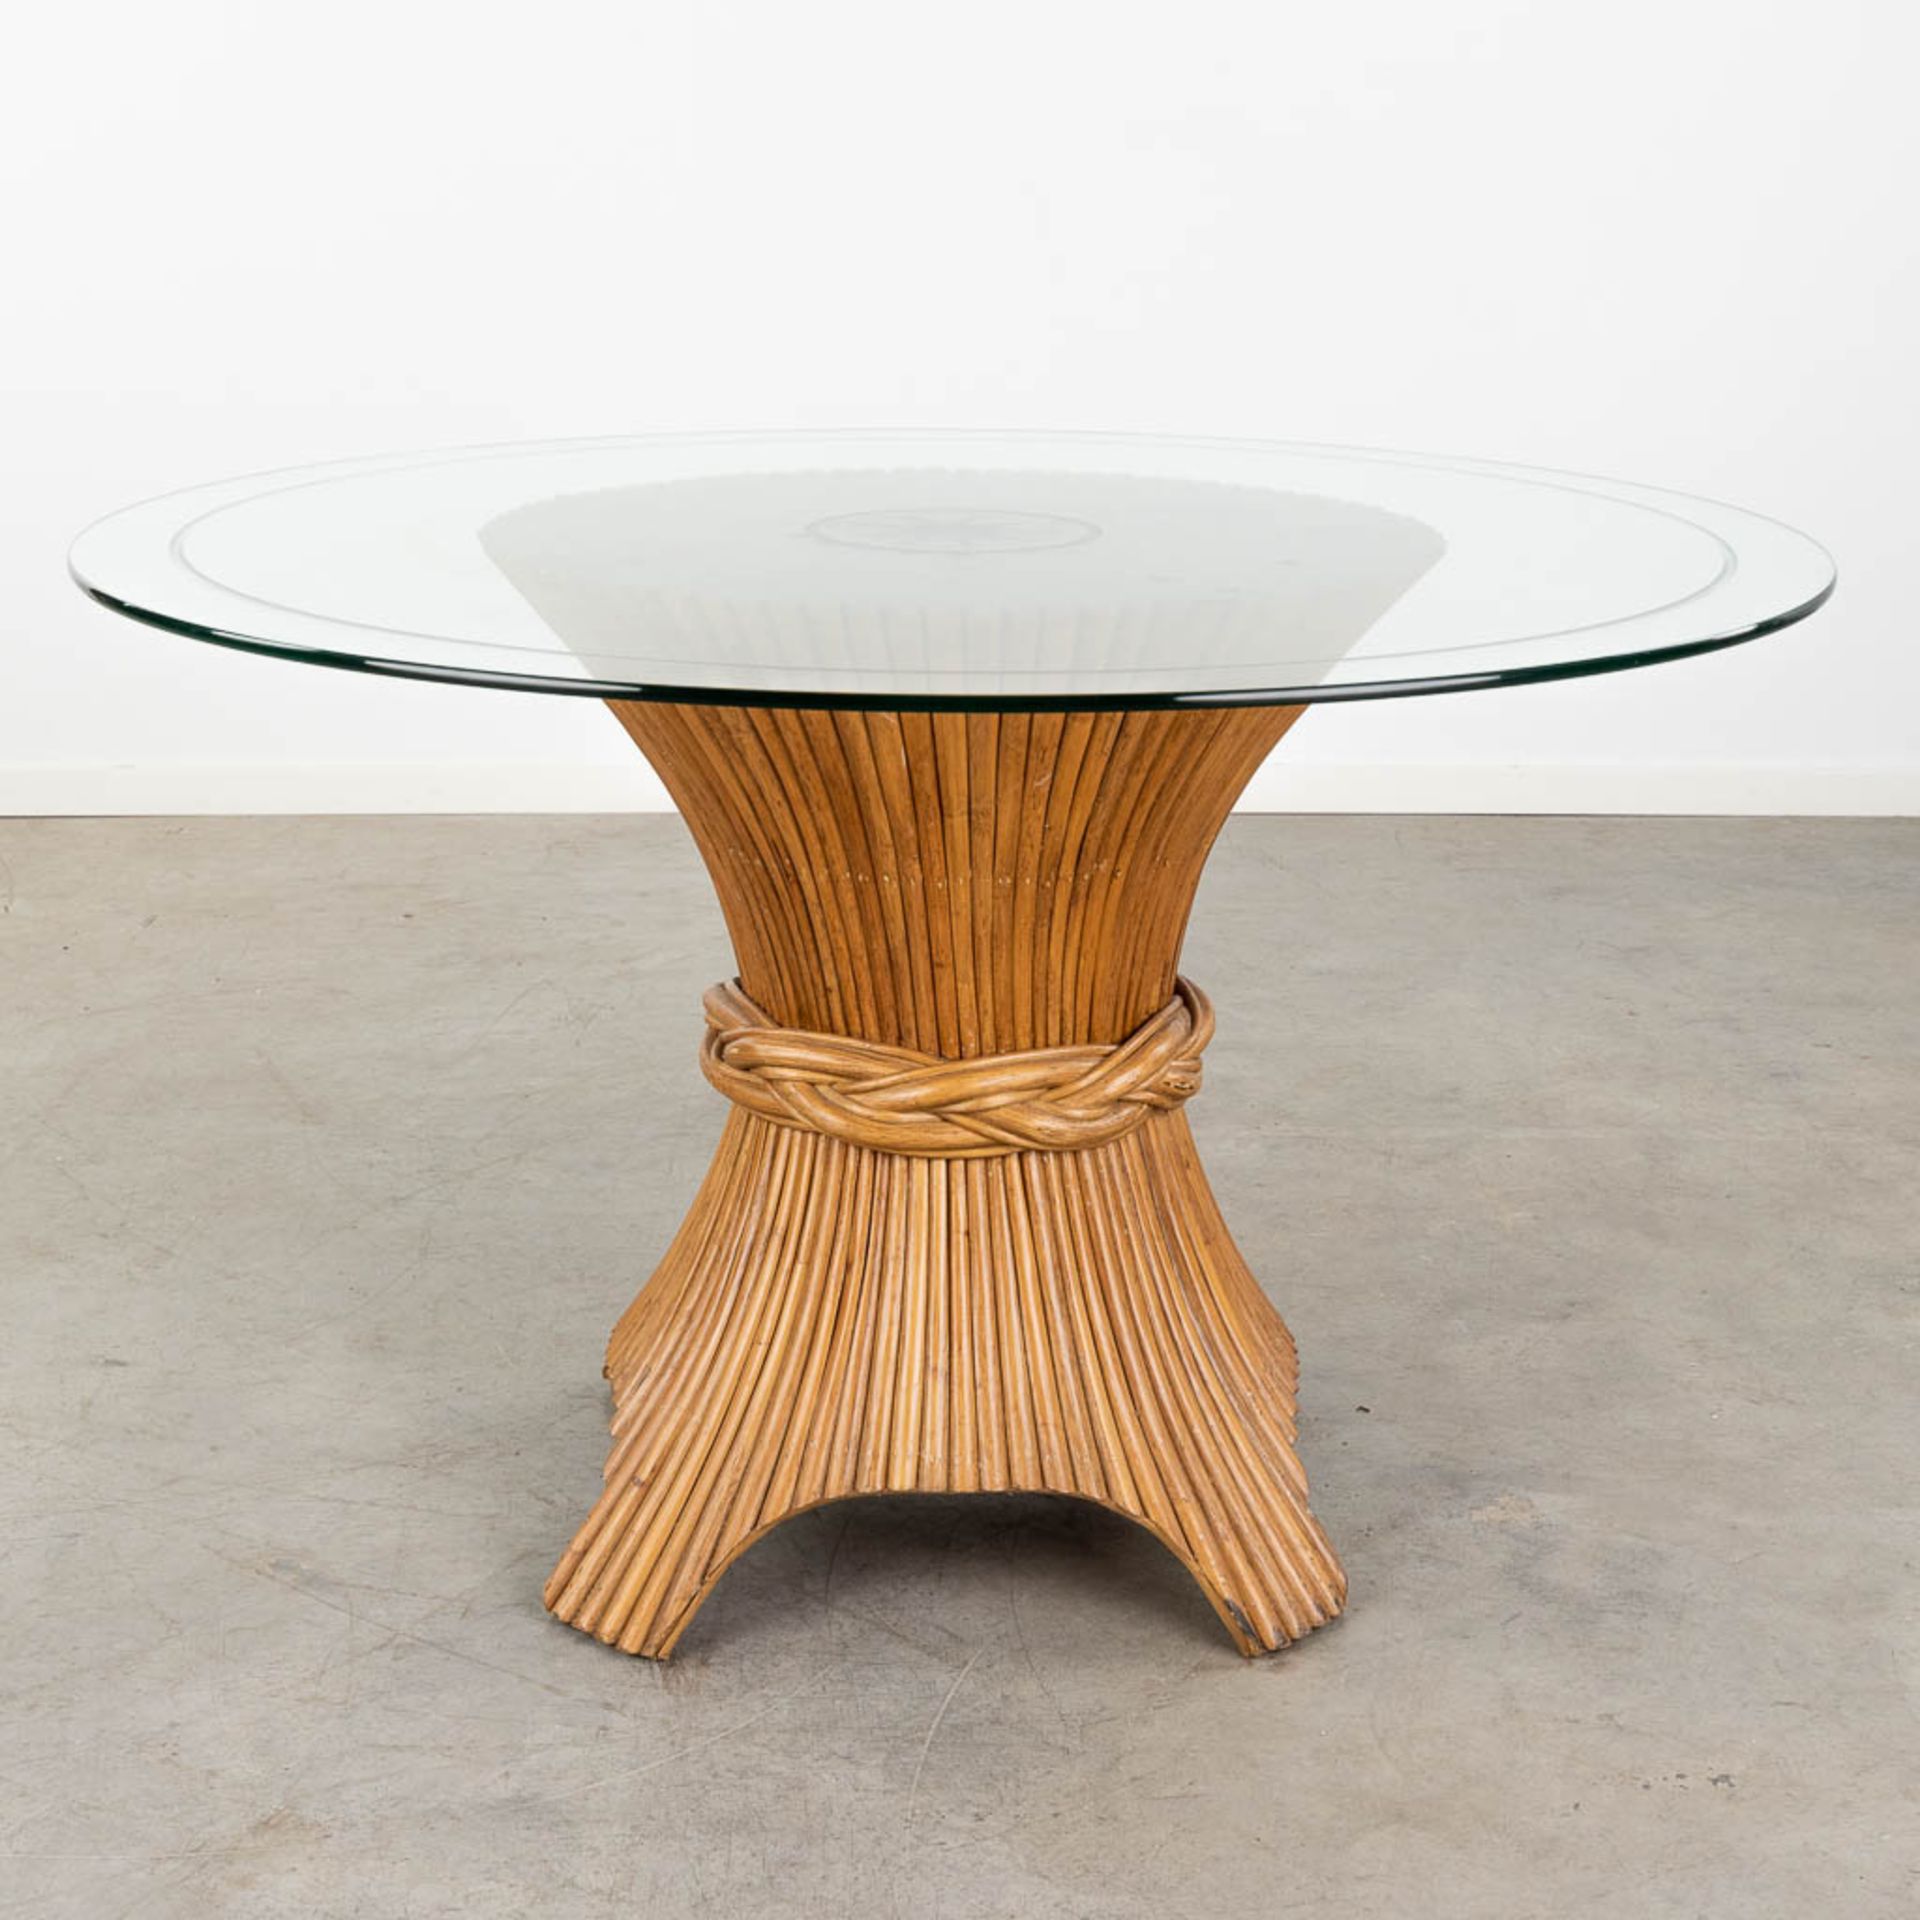 John MCGUIRE (1920-2013)(Atrr.) 'Sheaf of Wheat table or Bamboo table' glass top with an etched star